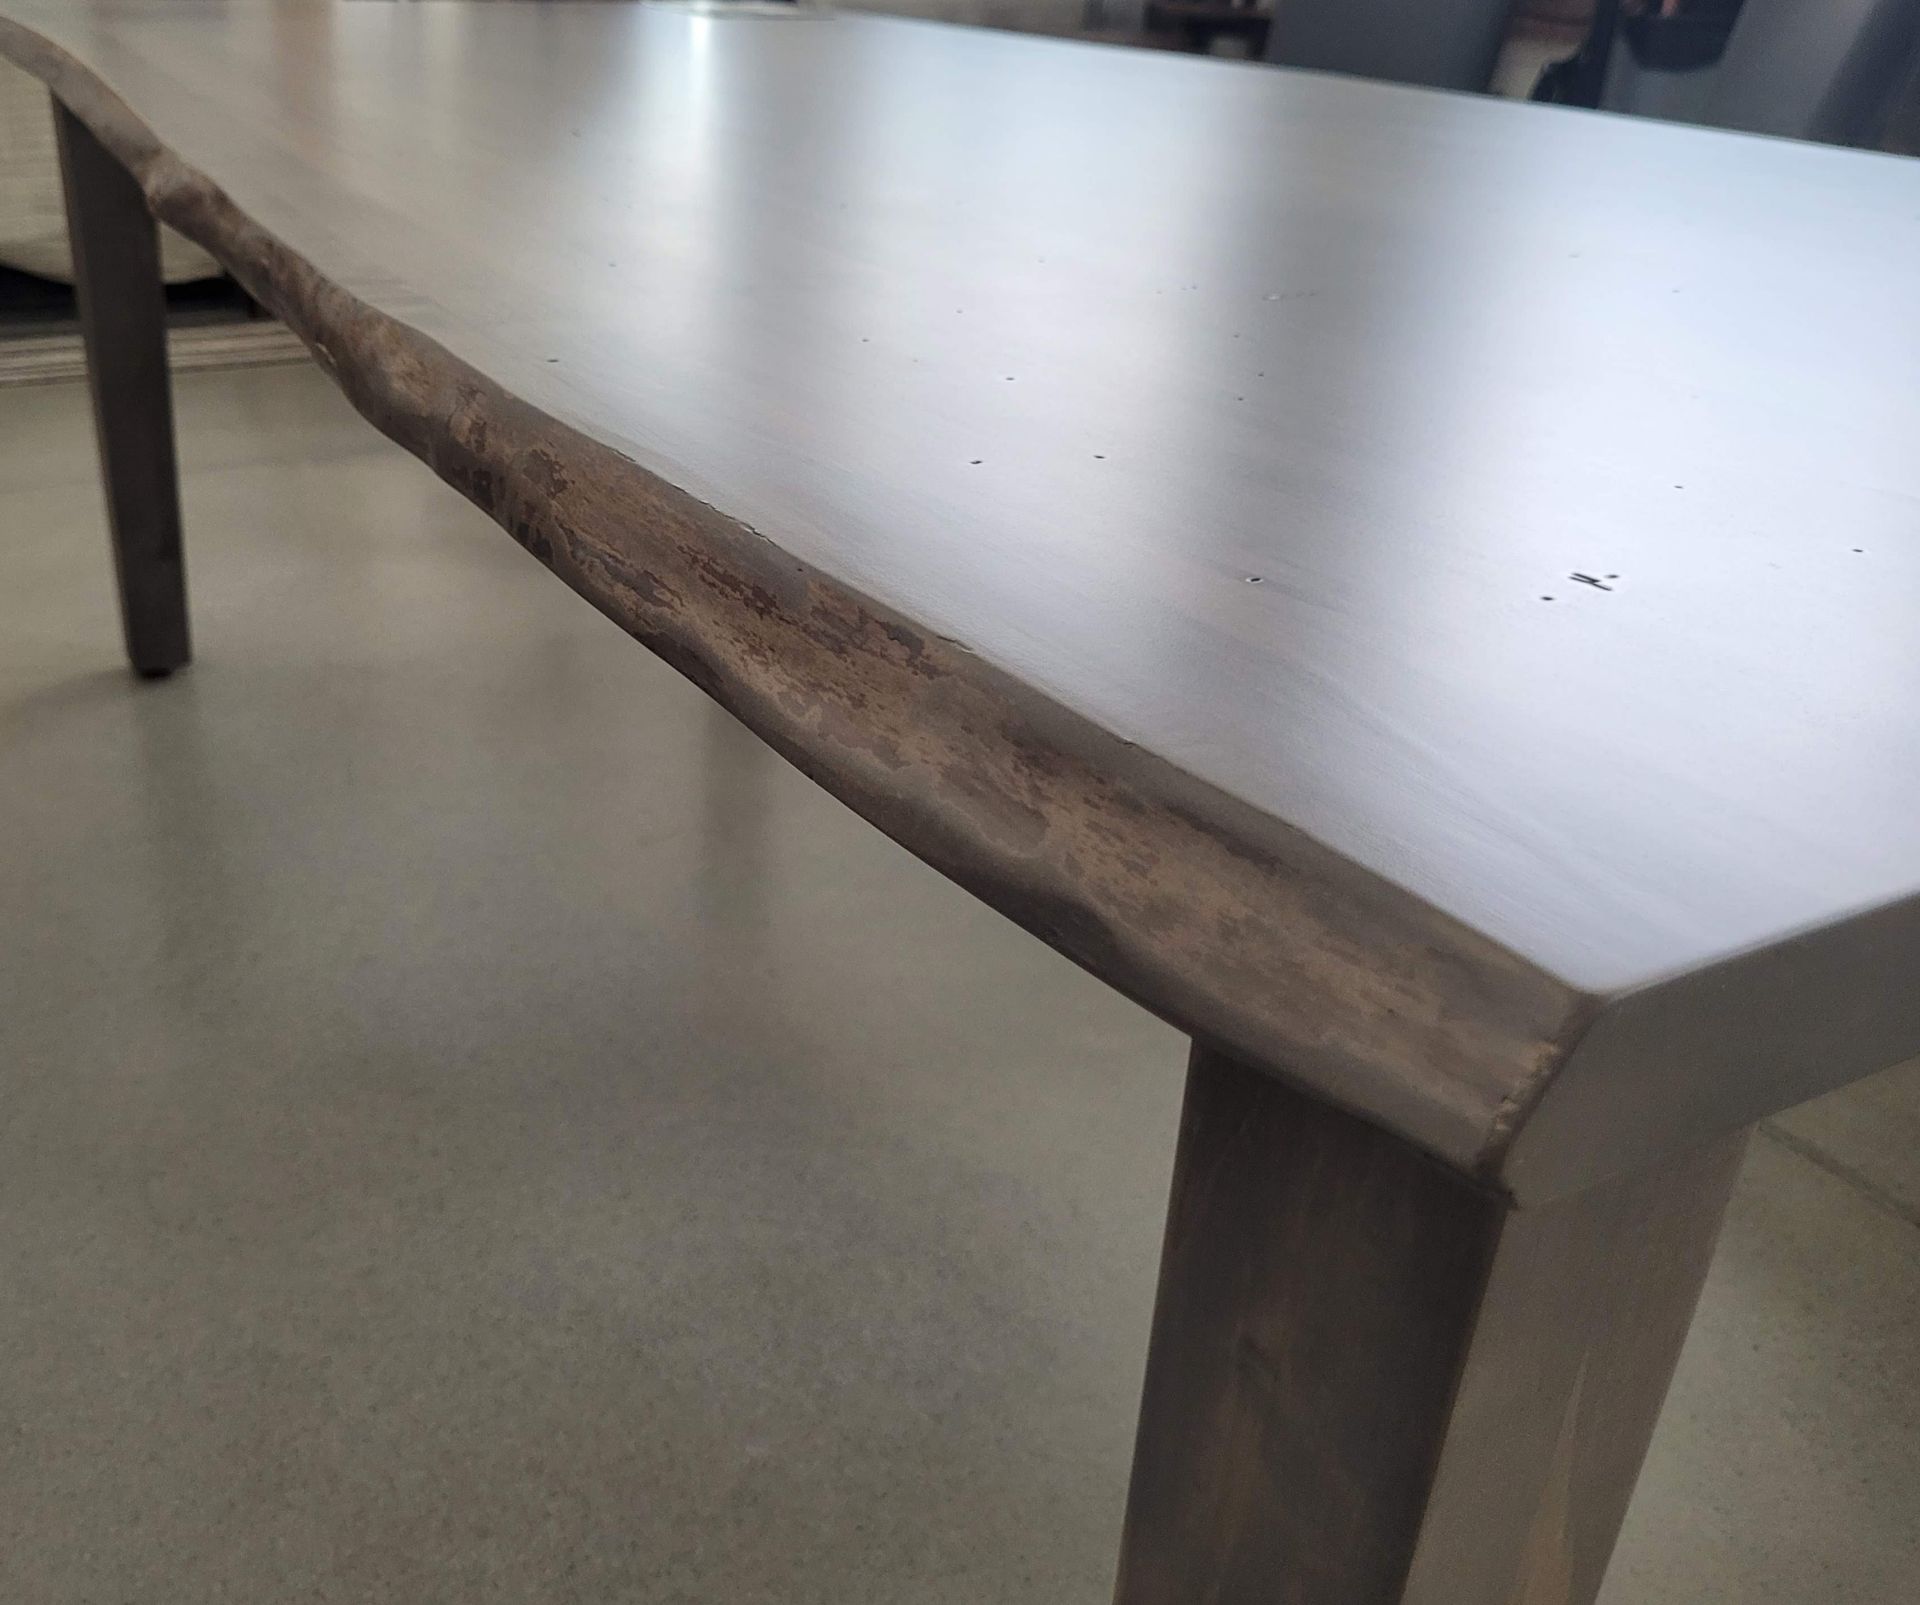 NORAH LIVE EDGE DINING TABLE - MSRP $3,600.00 - (TABLE ONLY - CHAIRS LOTTED SEPARATELY) - Image 6 of 8